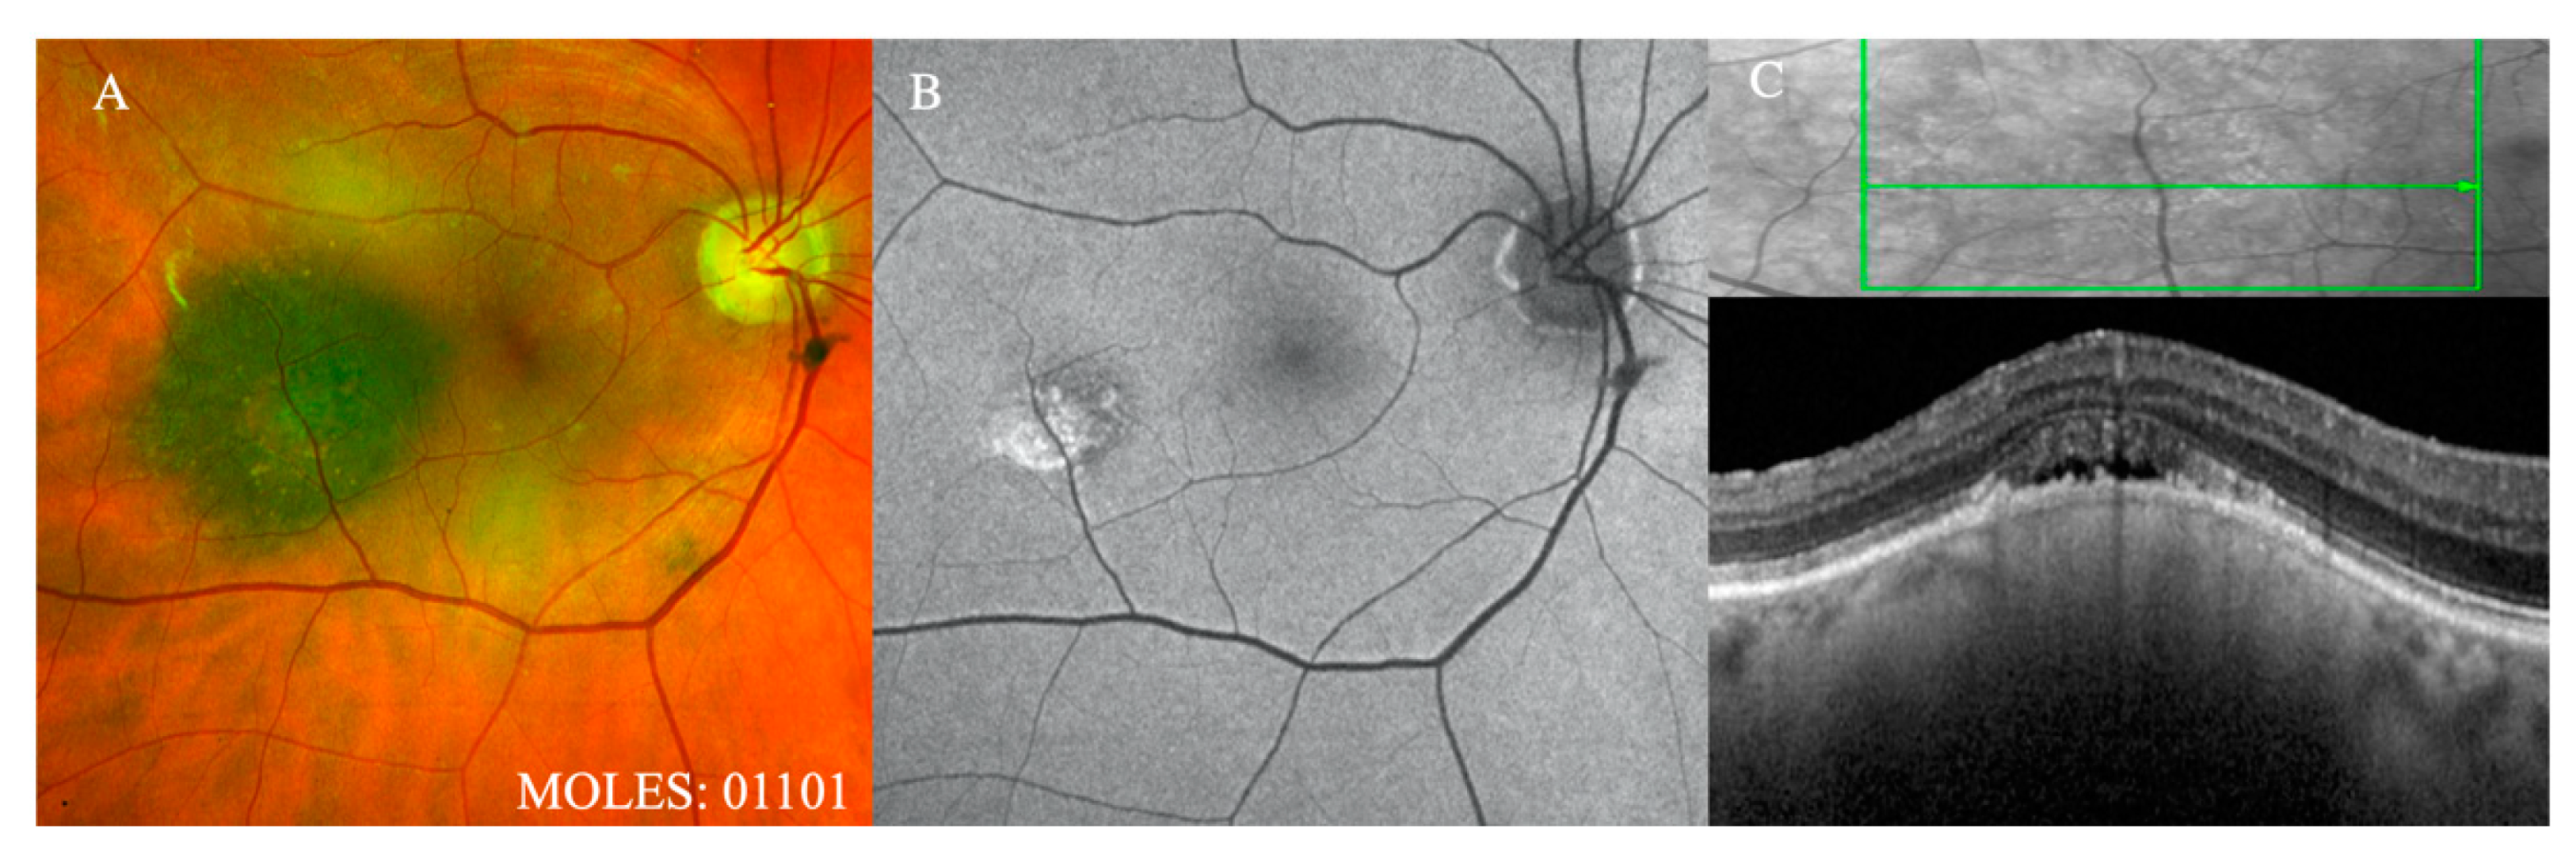 Cancers | Free Full-Text | The MOLES System for Planning Management of  Melanocytic Choroidal Tumors: Is It Safe?